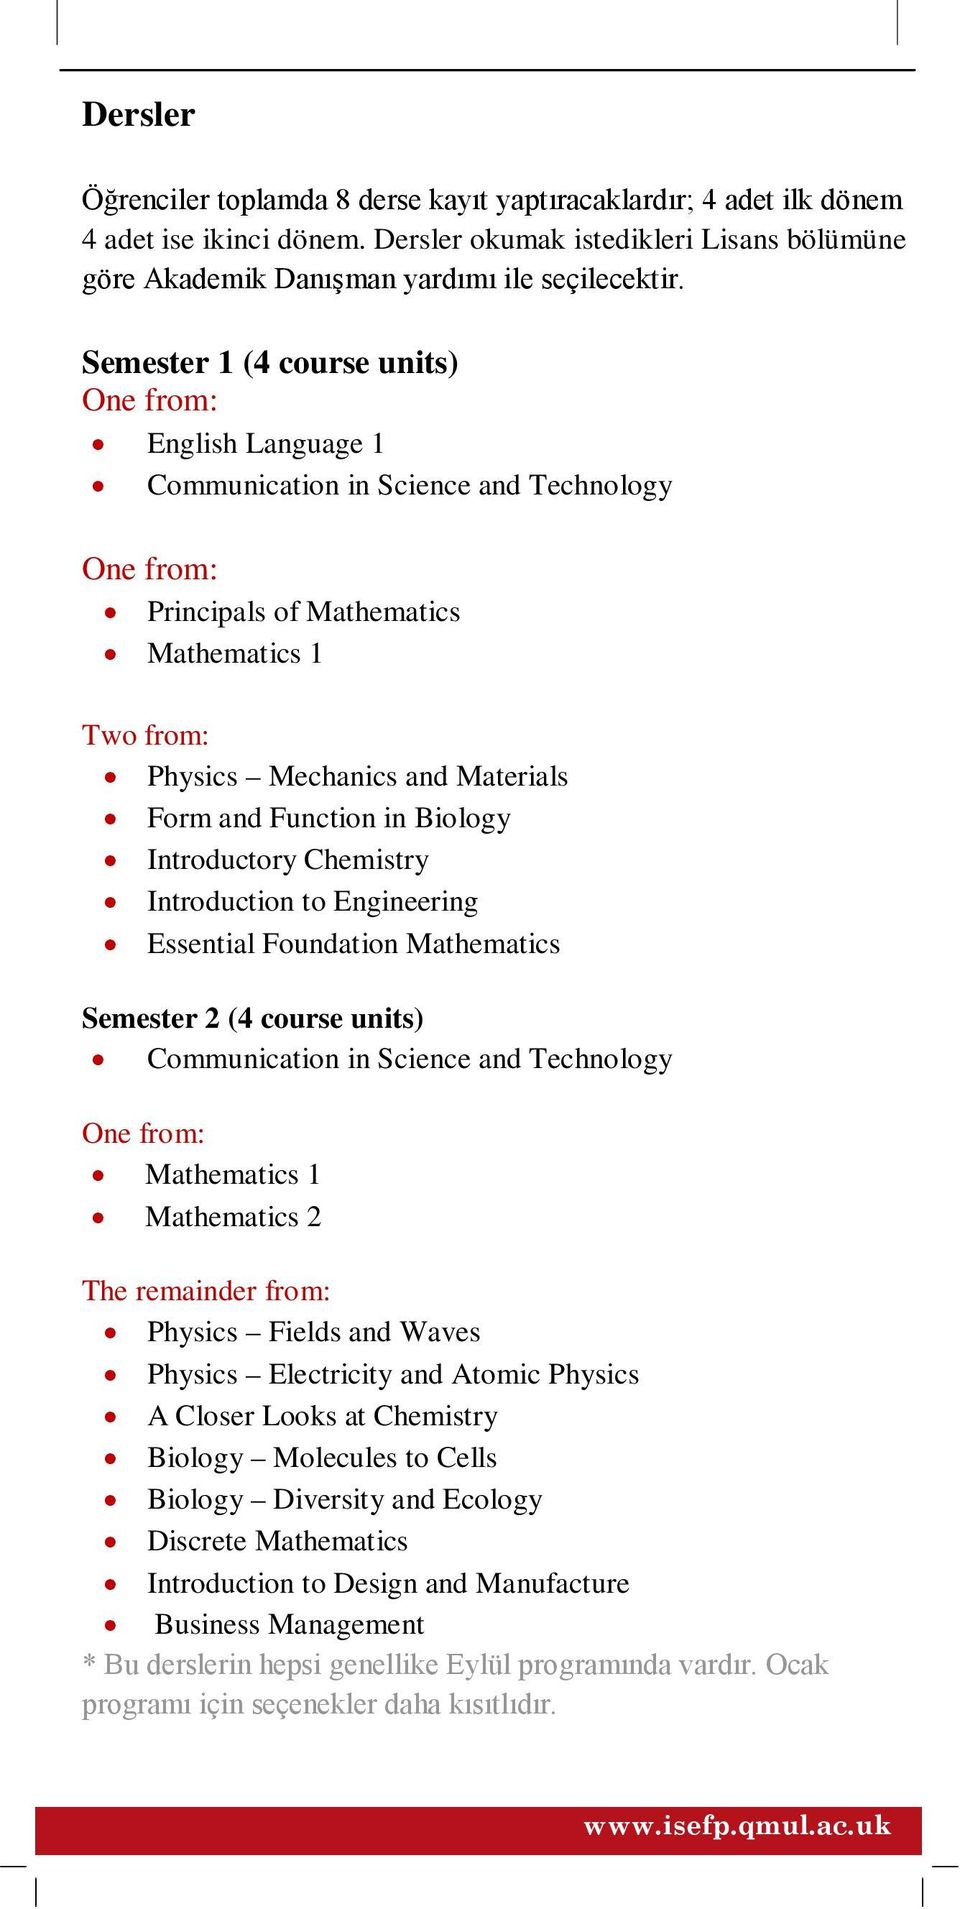 Function in Biology Introductory Chemistry Introduction to Engineering Essential Foundation Mathematics Semester 2 (4 course units) Communication in Science and Technology One from: Mathematics 1